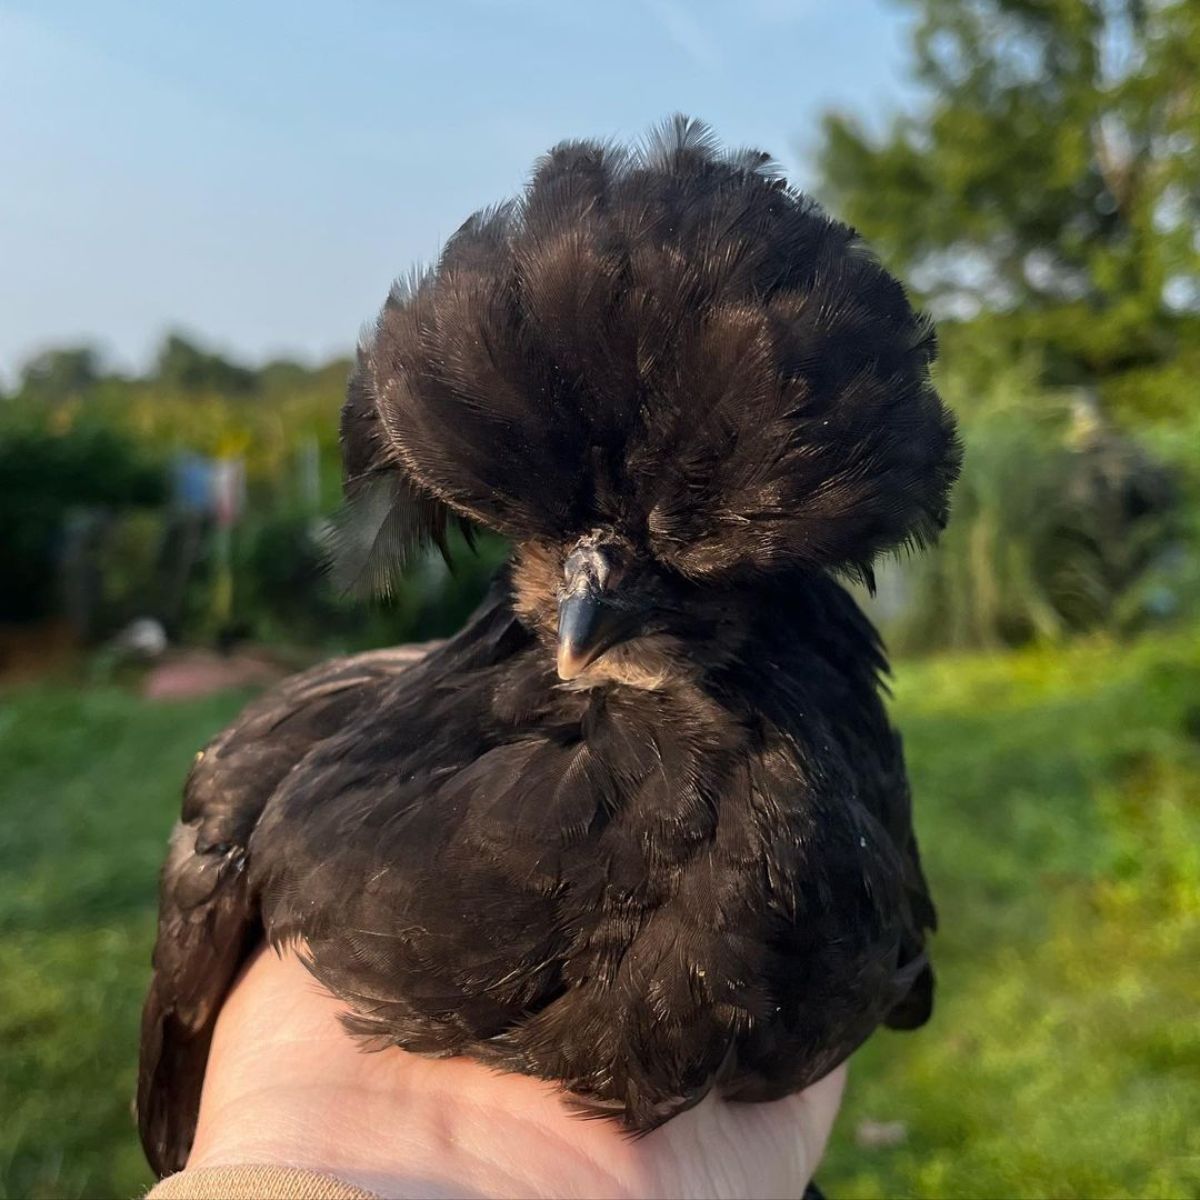 An adorable Crevecoeur hen perched on a hand.